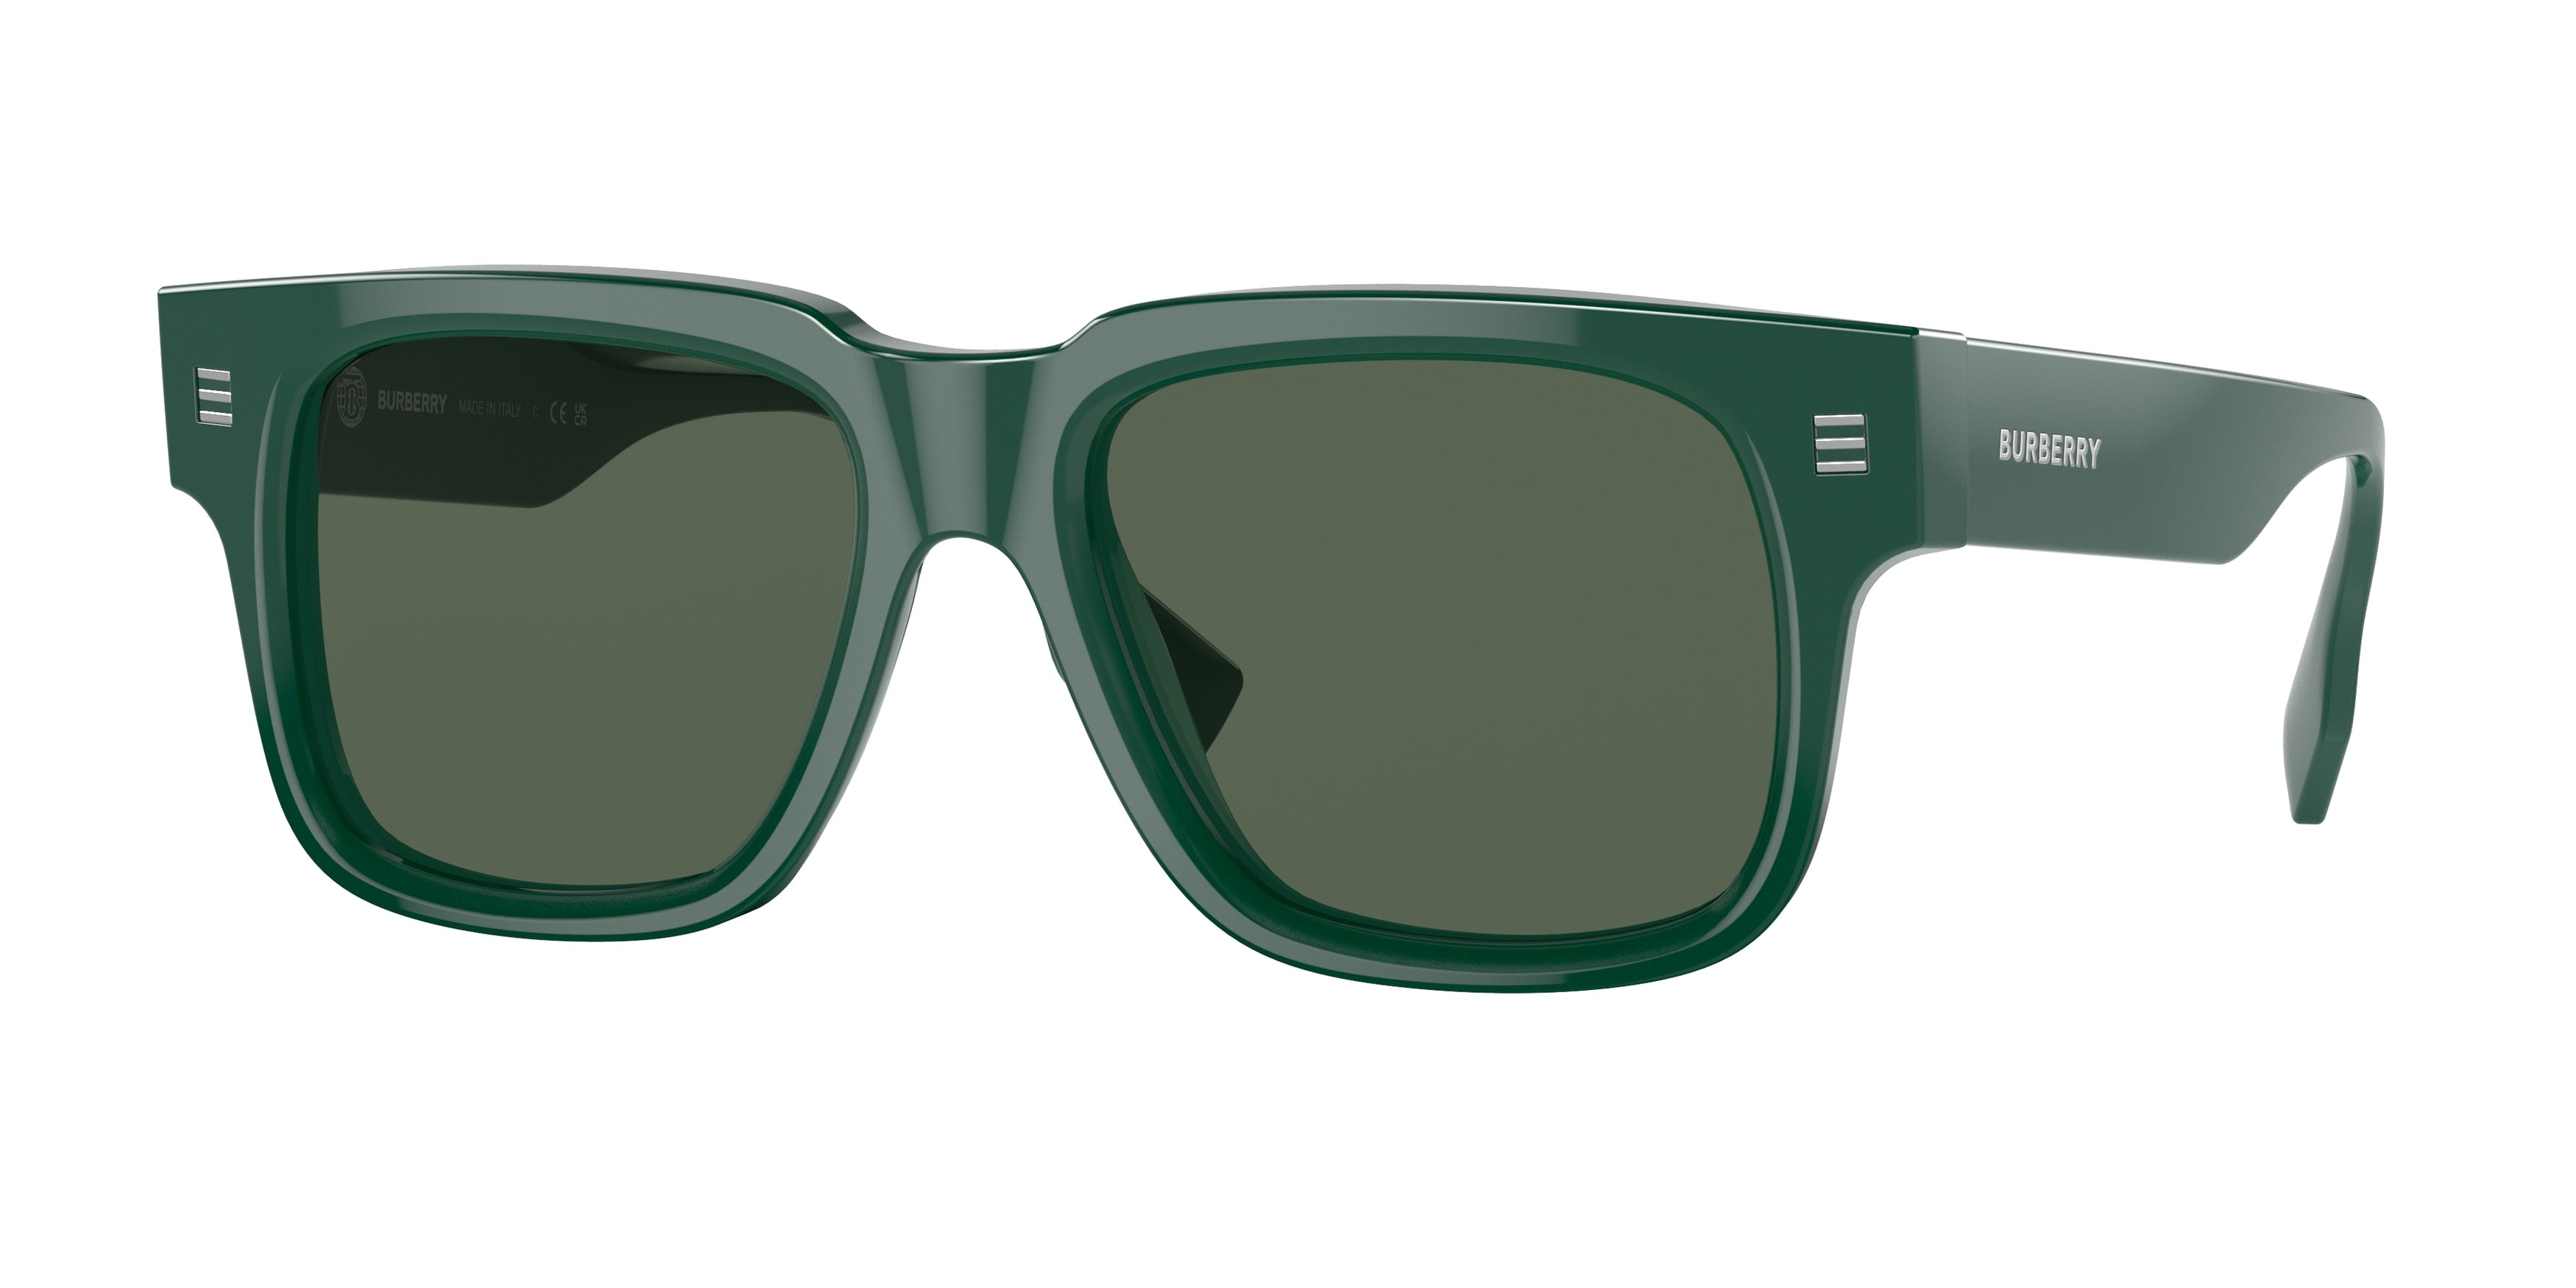 Burberry HAYDEN BE4394F Square Sunglasses  405971-Green 54-150-18 - Color Map Green